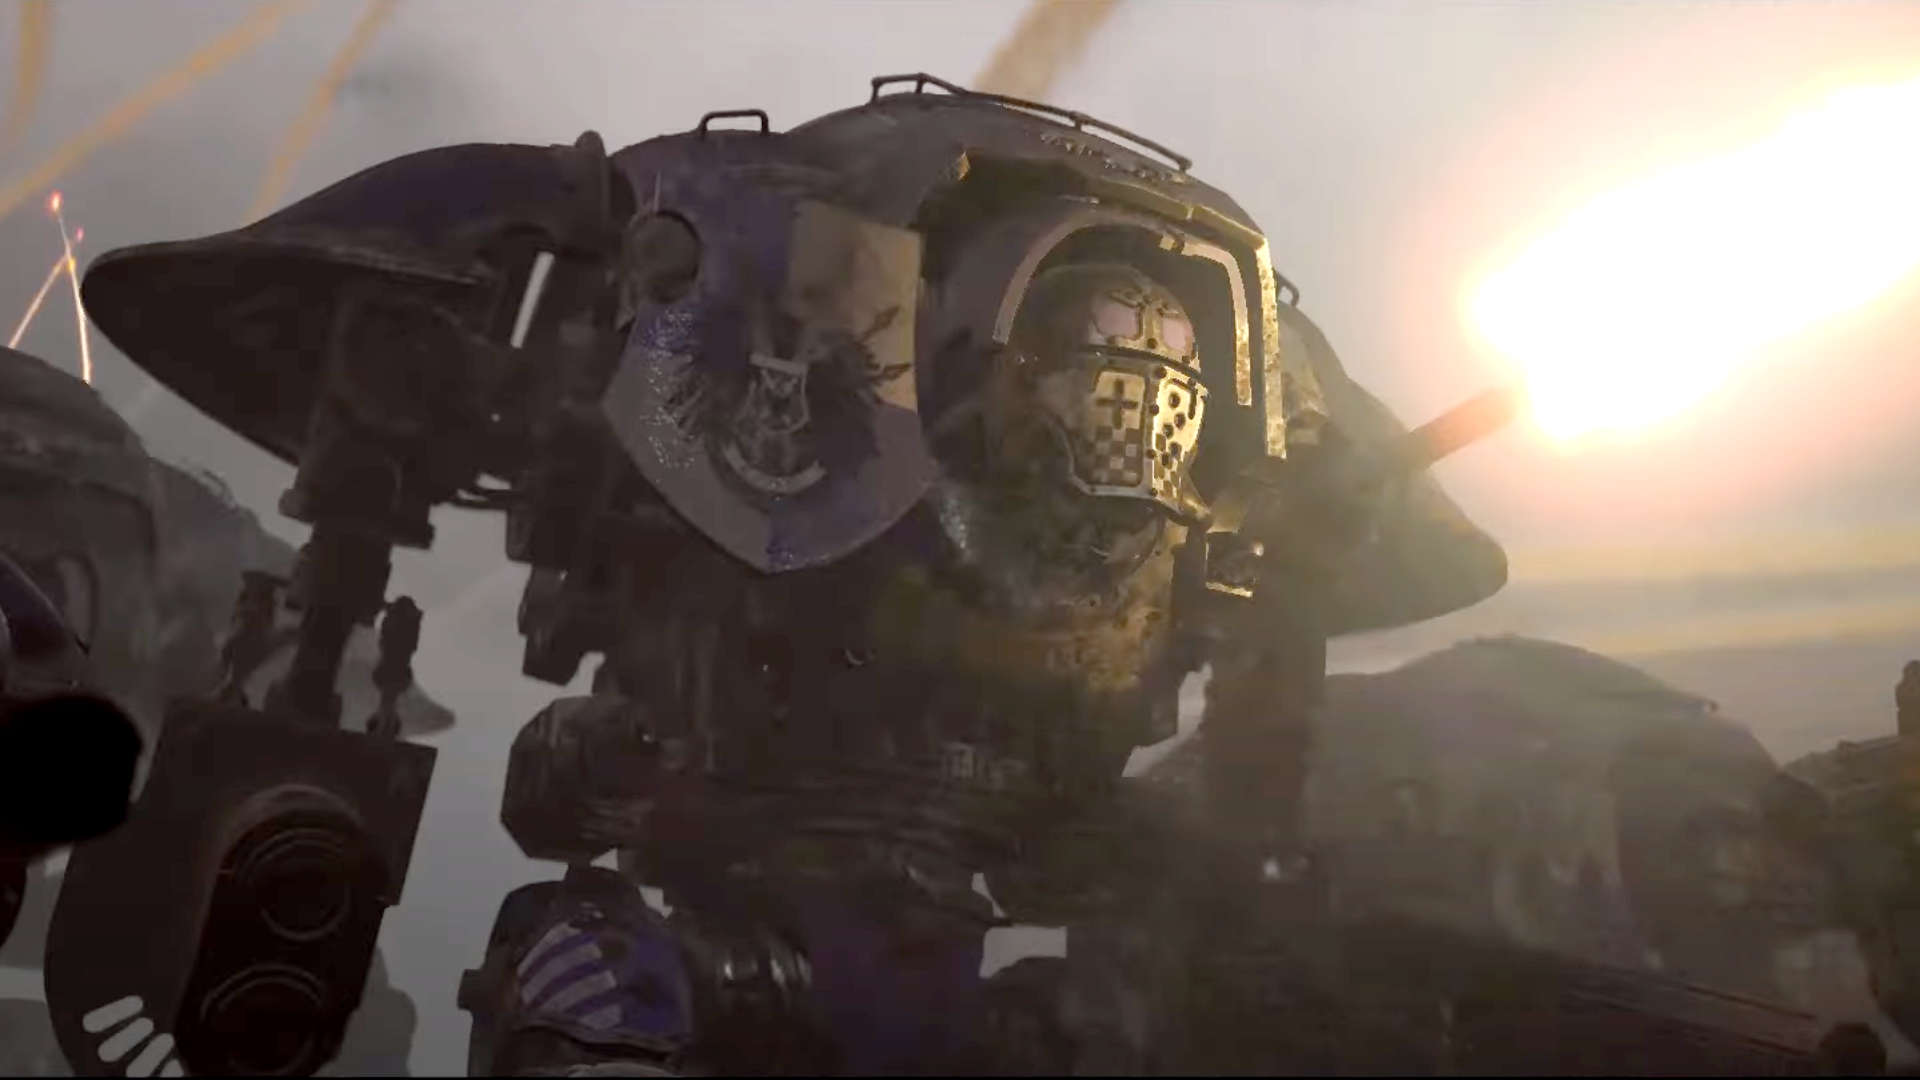 The new Warhammer Plus show looks like a 90s RTS cinematic